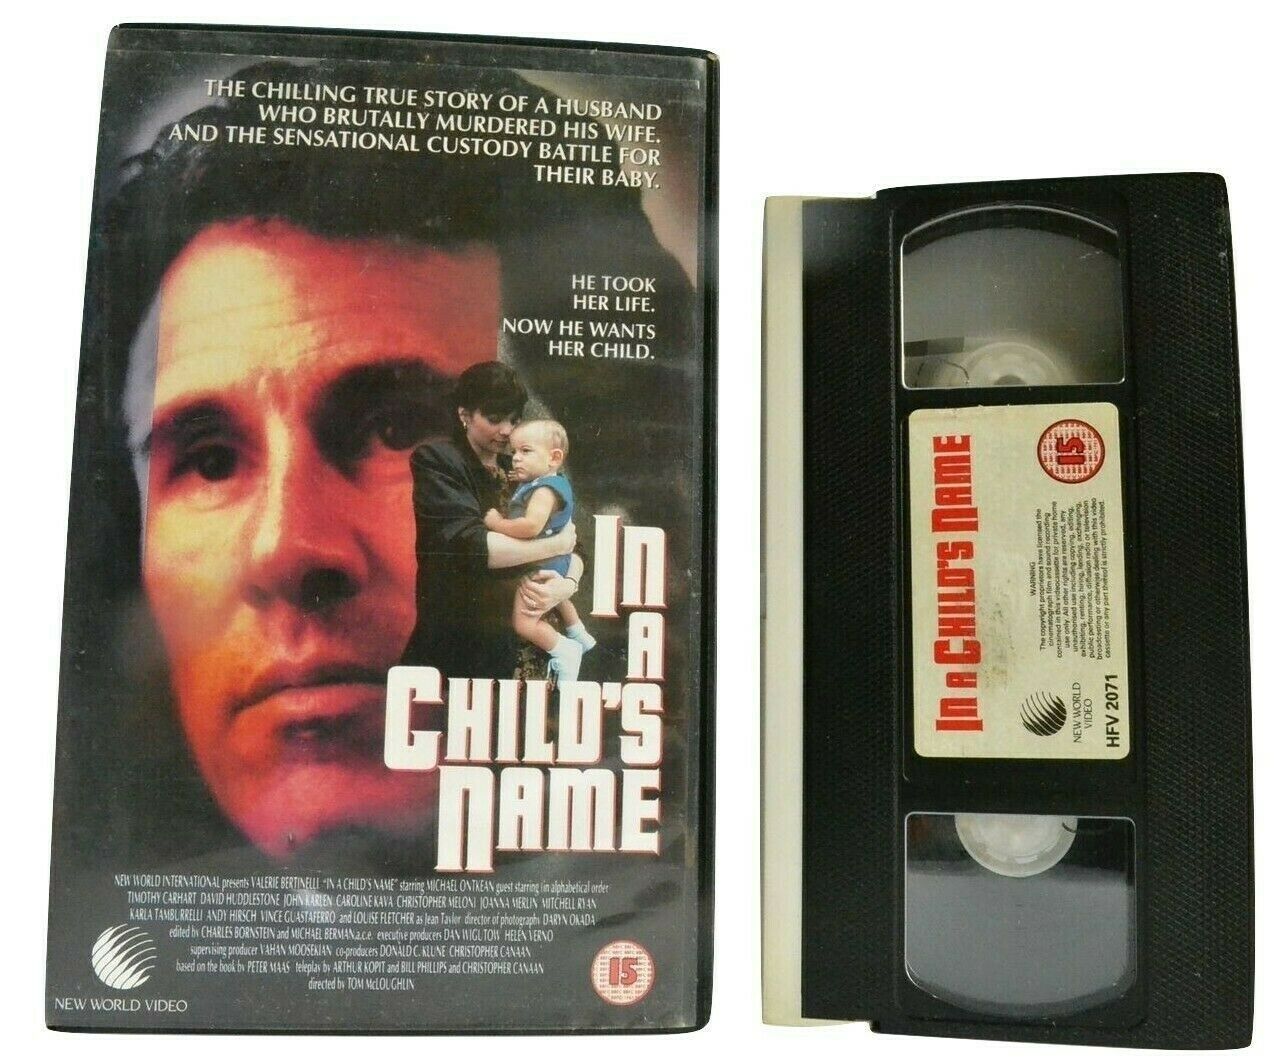 In A Child's Name: (1991) TV Miniseries [Biographical Drama] Large Box - Pal VHS-